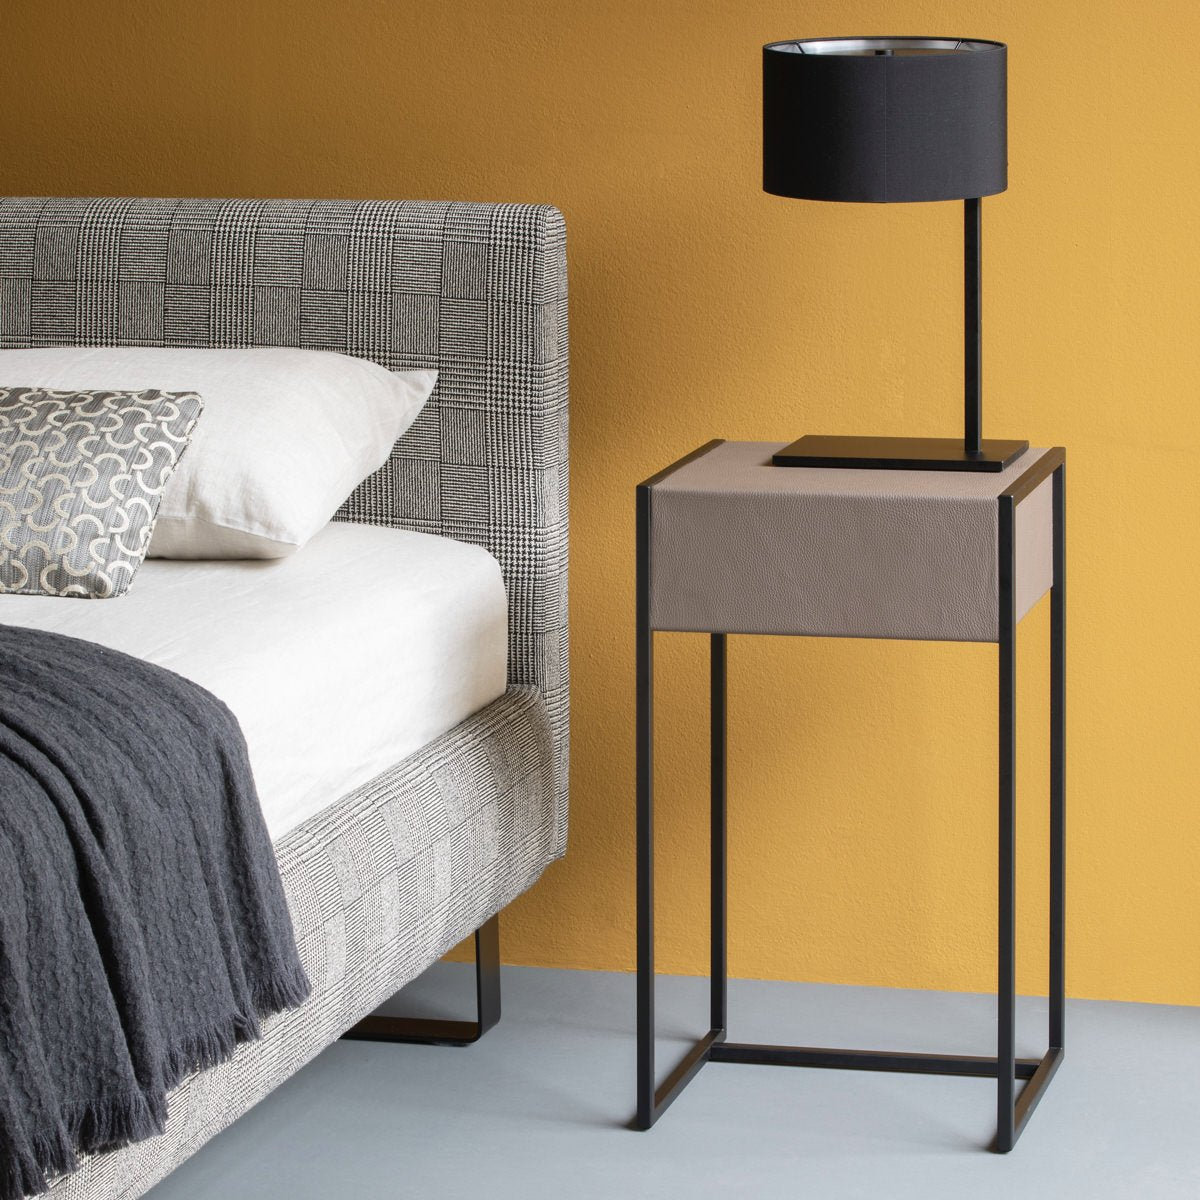 Modern metal Bedside Table lamp with Lamp shade